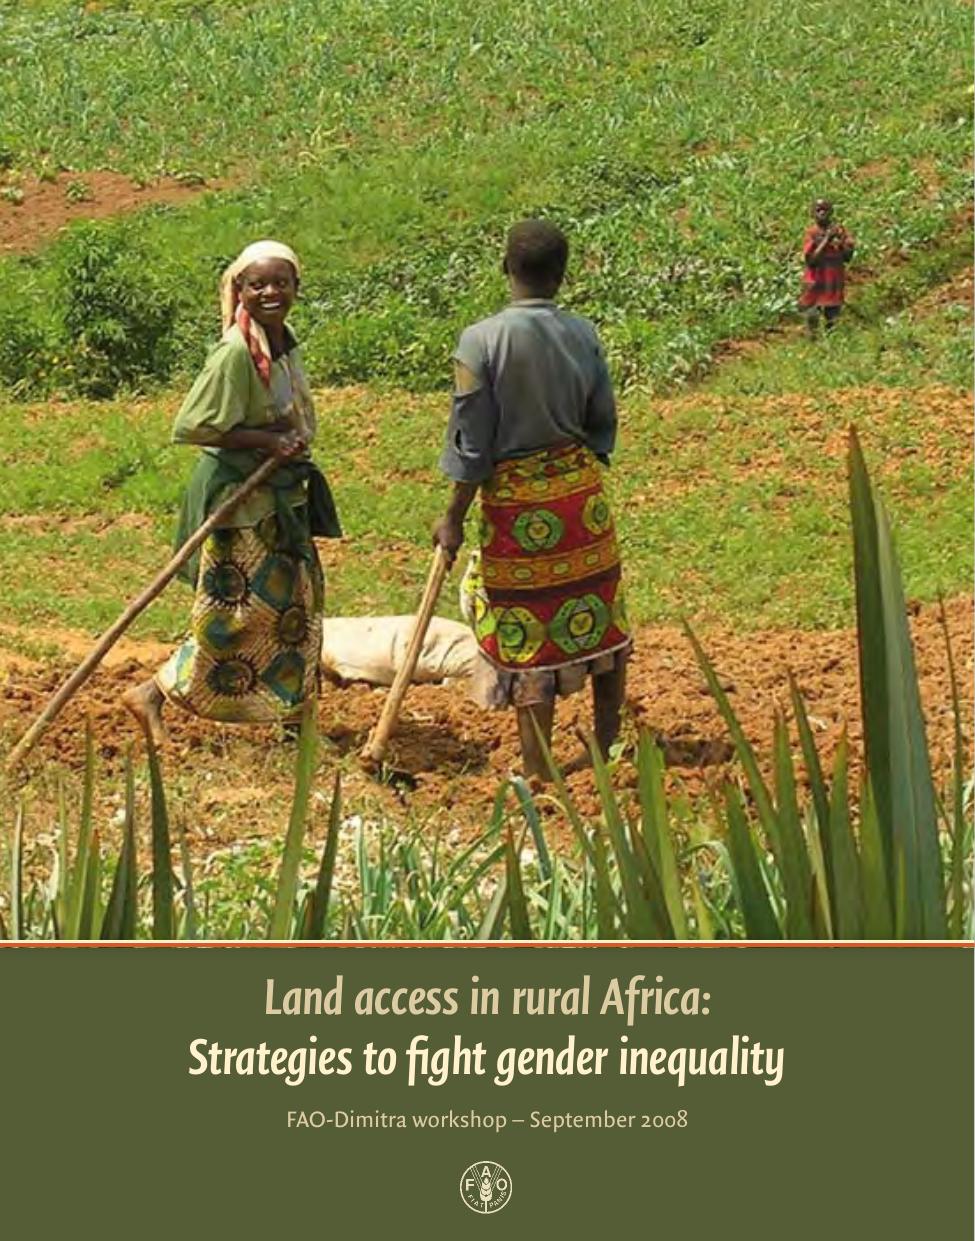 LAND ACCESS IN RURAL AFRICA